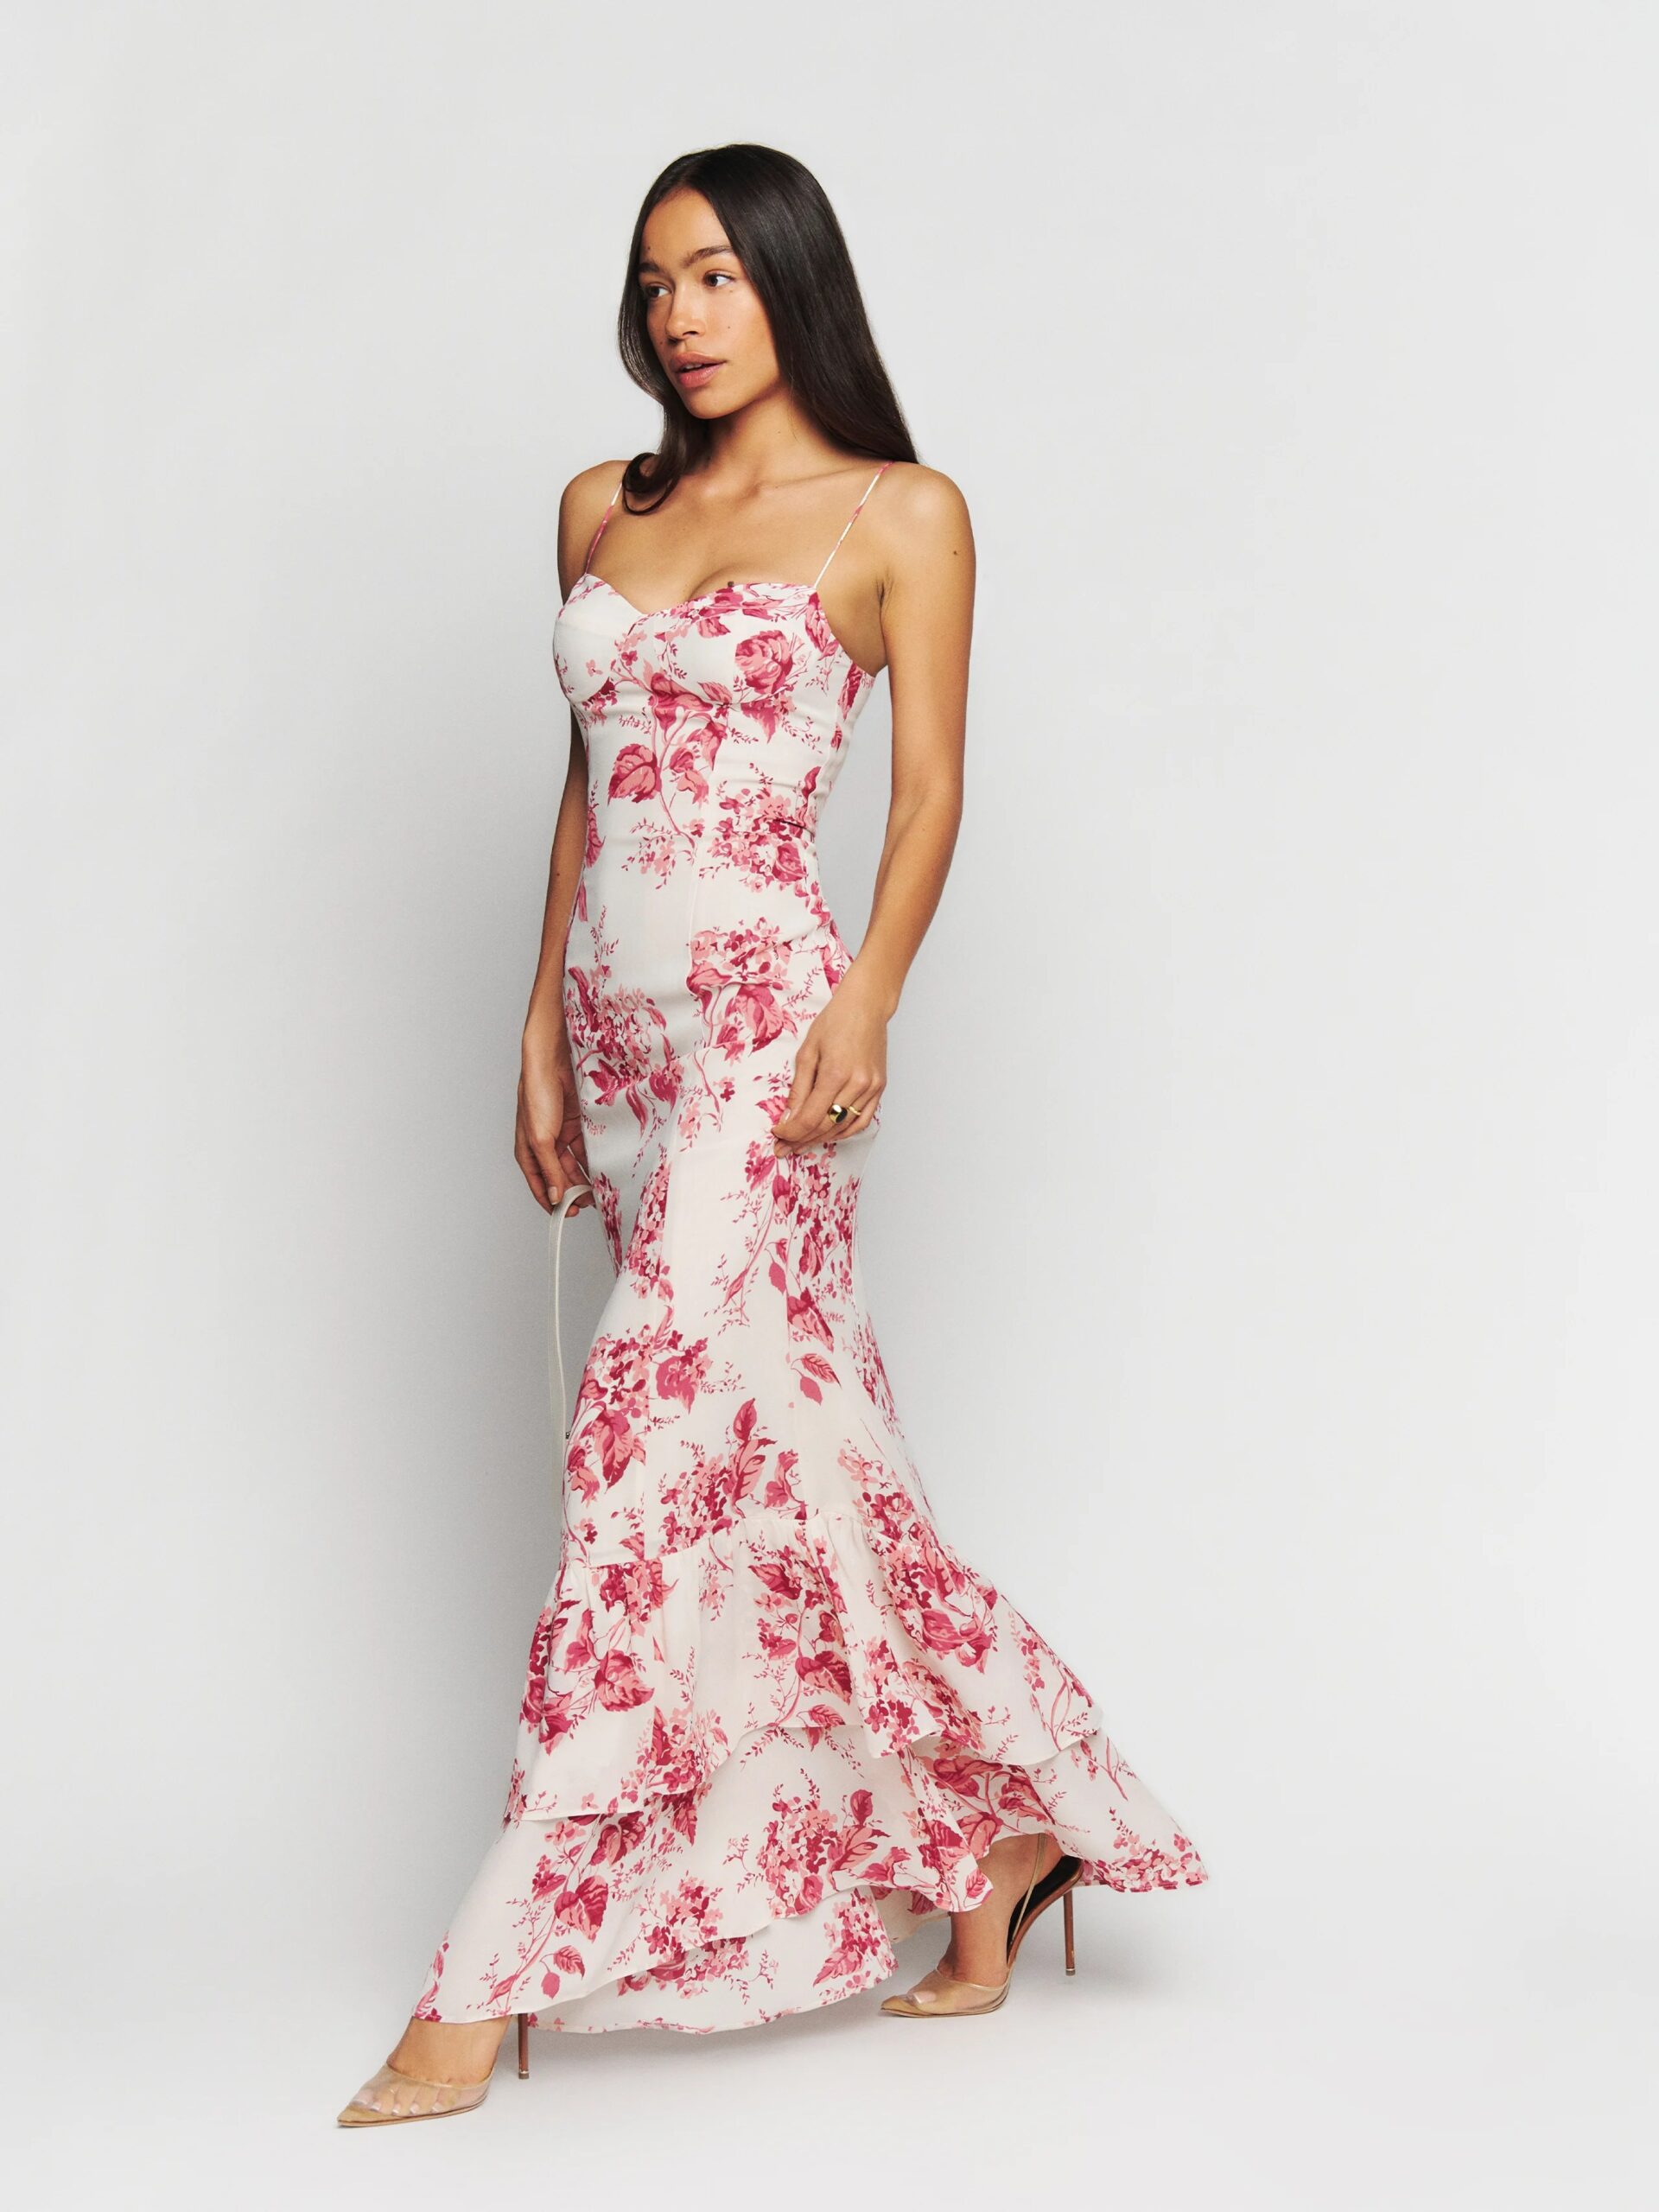 40 Floral Wedding Guest Dresses You Can Shop Right Now